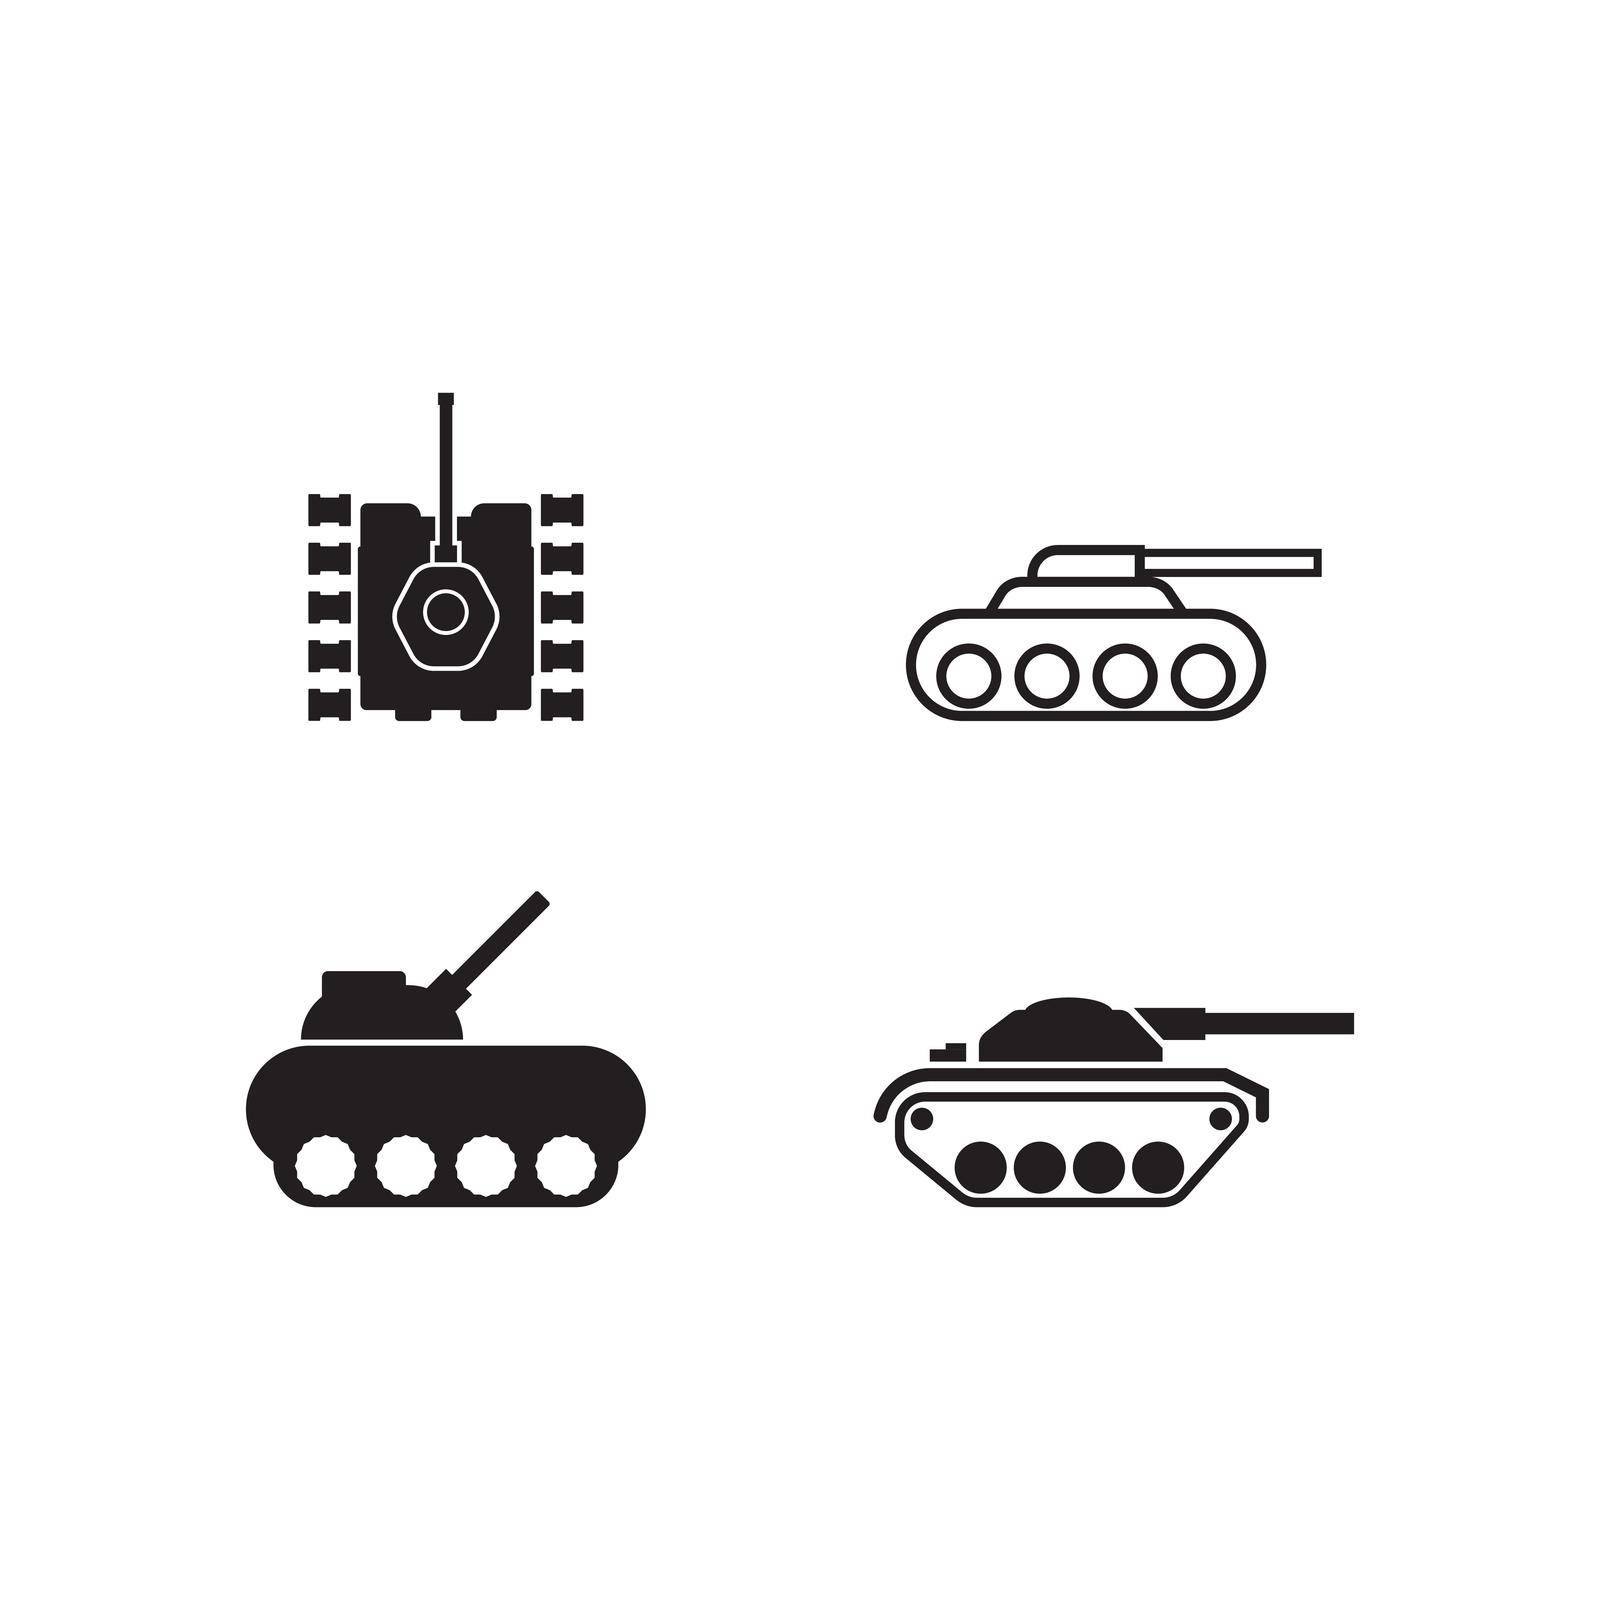 Military tank icon by rnking